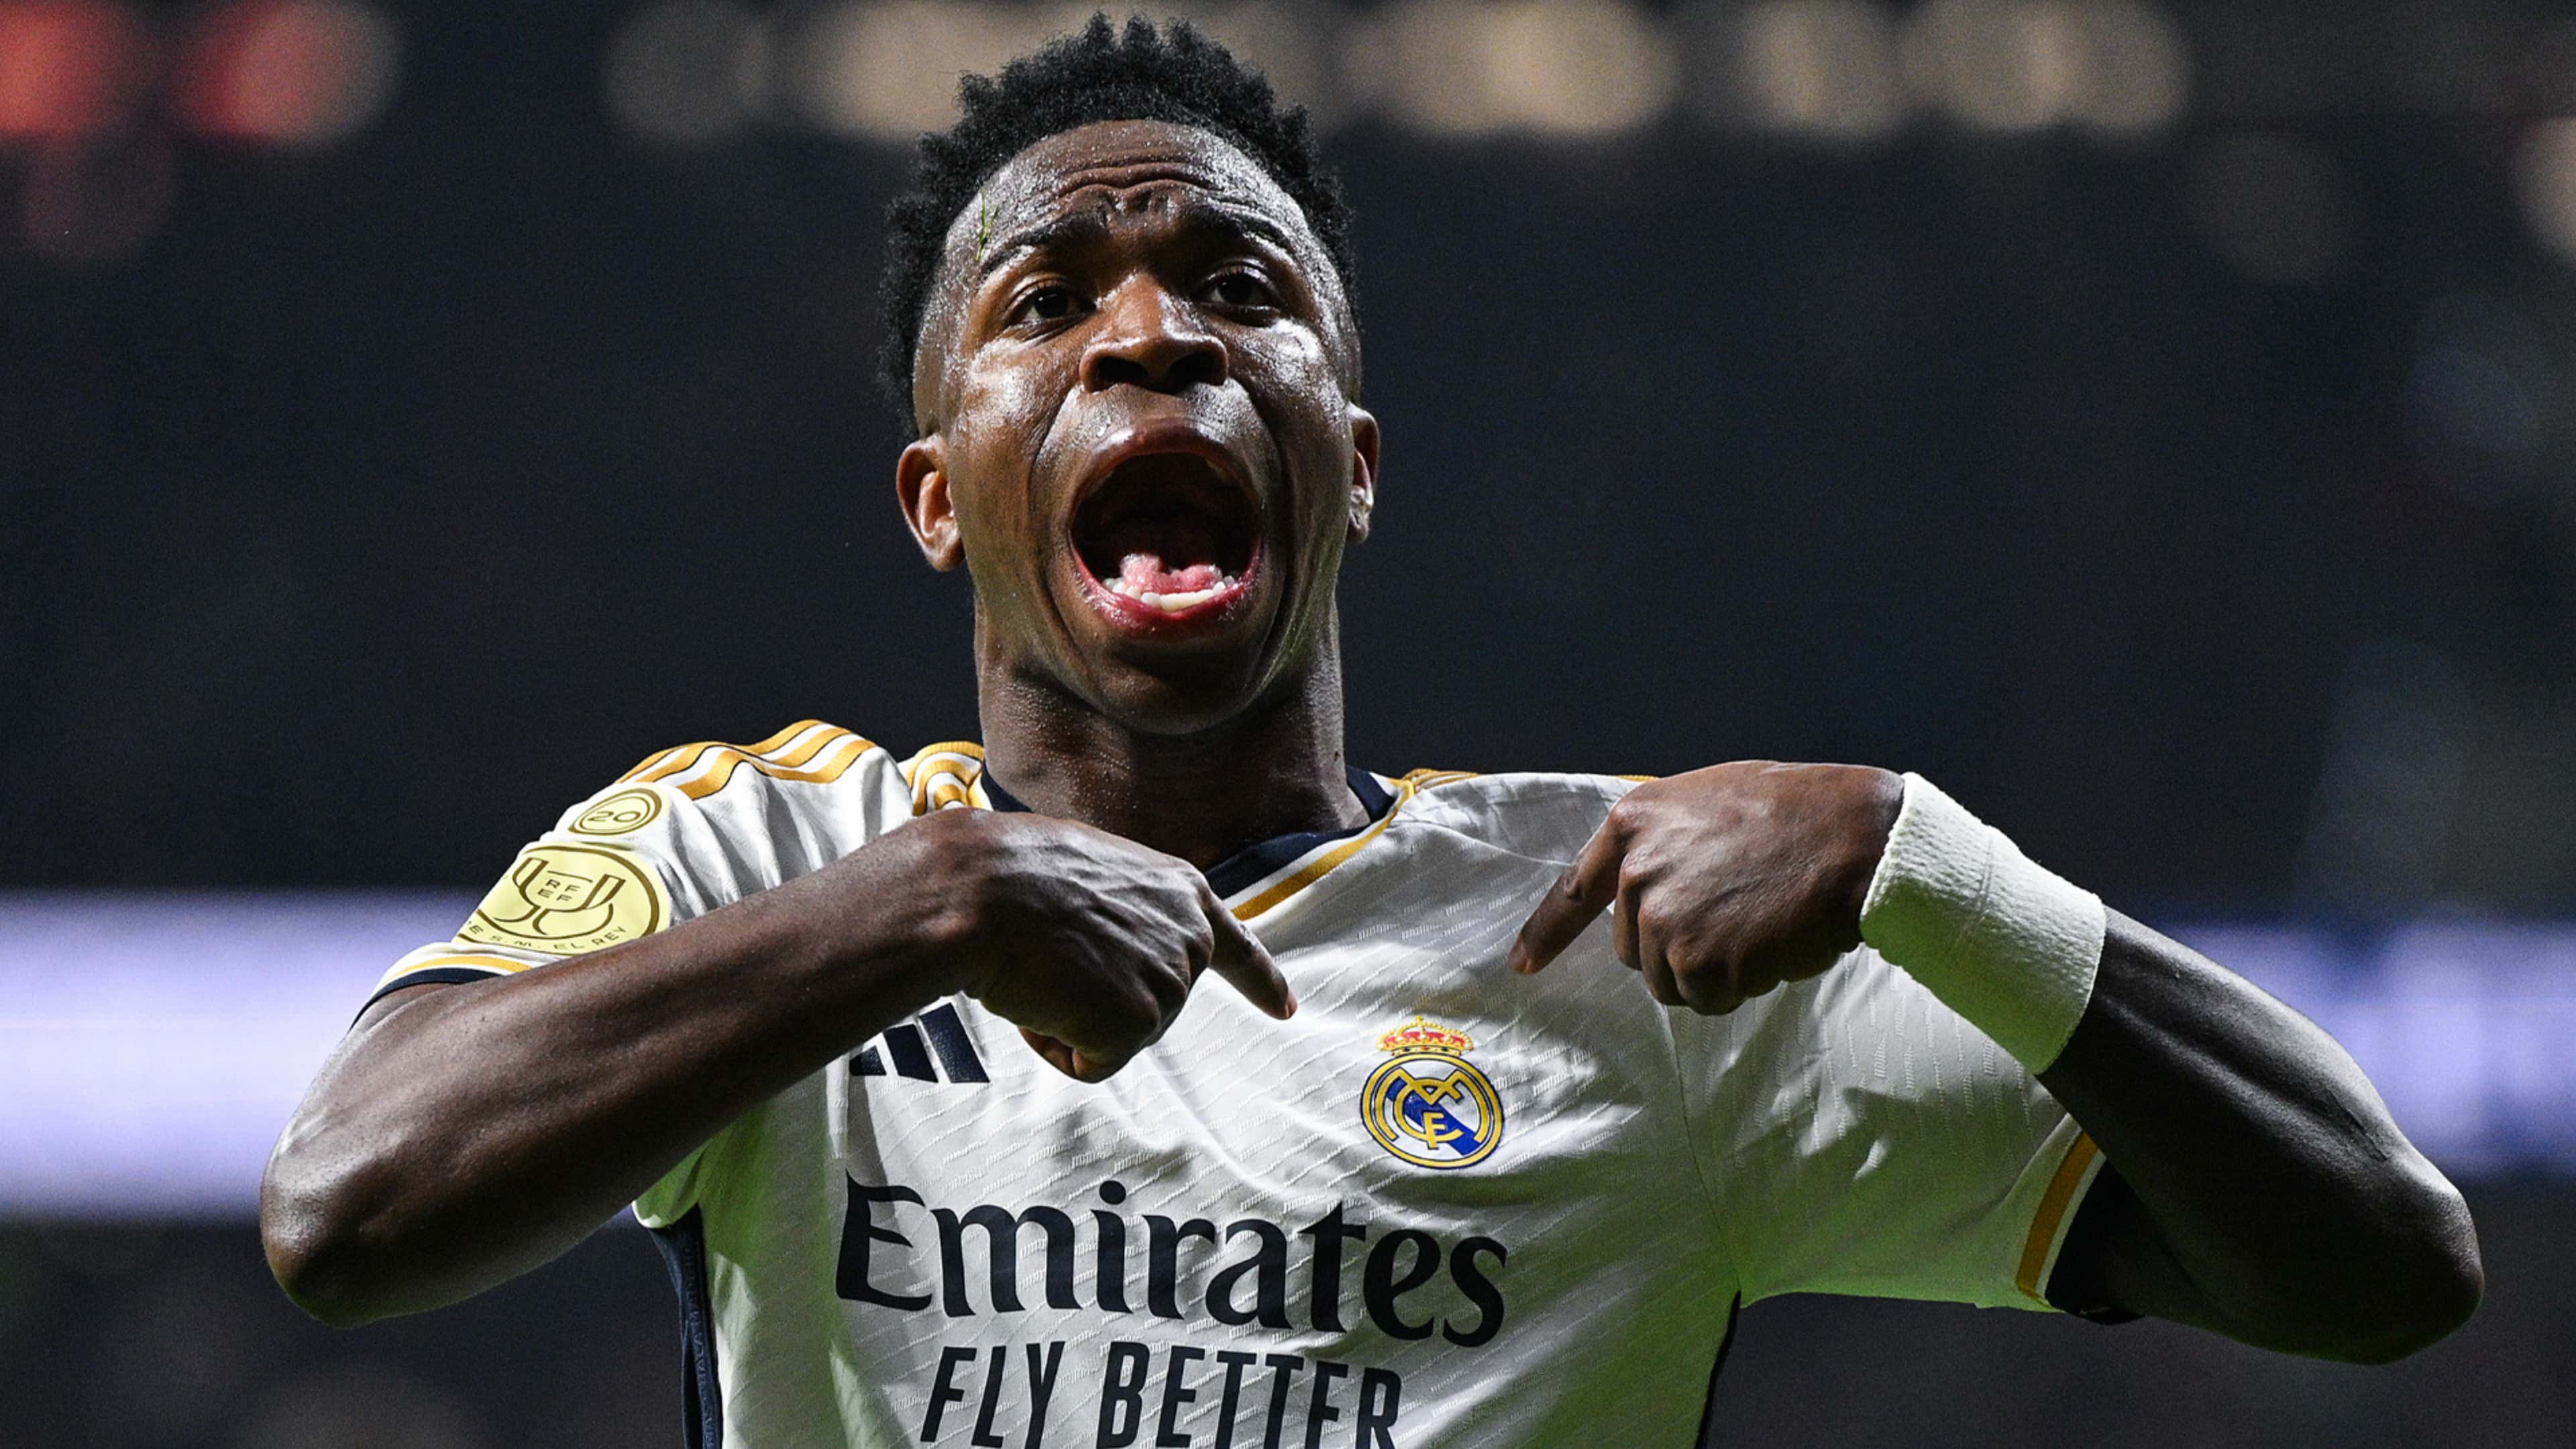 Vinícius Jr. is named UCL Player of the Week after two goals and